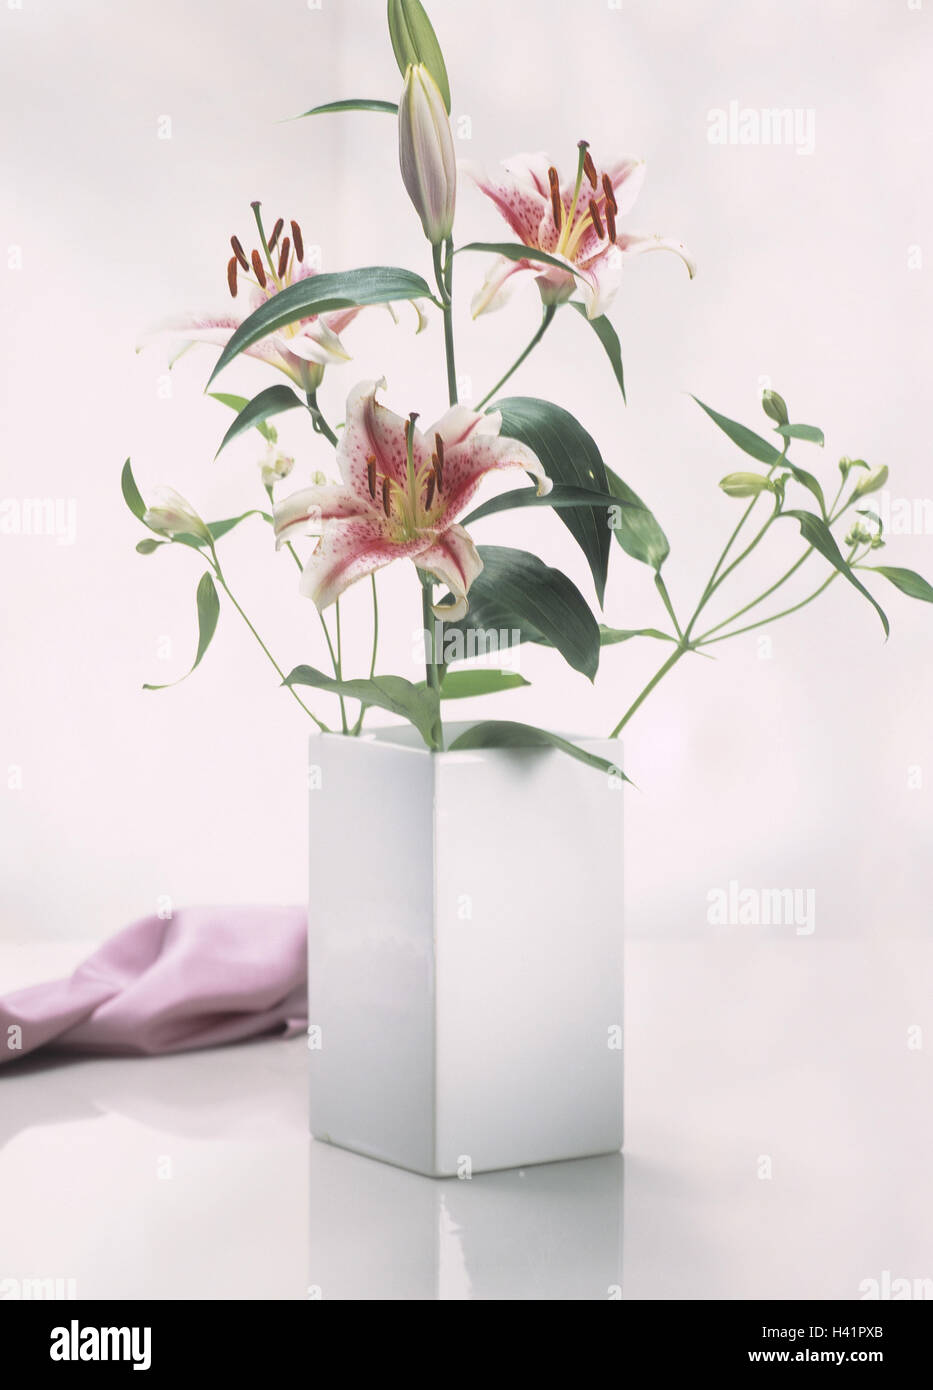 Vase, lily, blossom flower vase, angularly, white, flower, flowers, blossoms, flowerage, admirably, living space decoration, elegant, classically, ornamentally, conception, odour, fragrant, aroma, flower odour, beauty, Still life Stock Photo